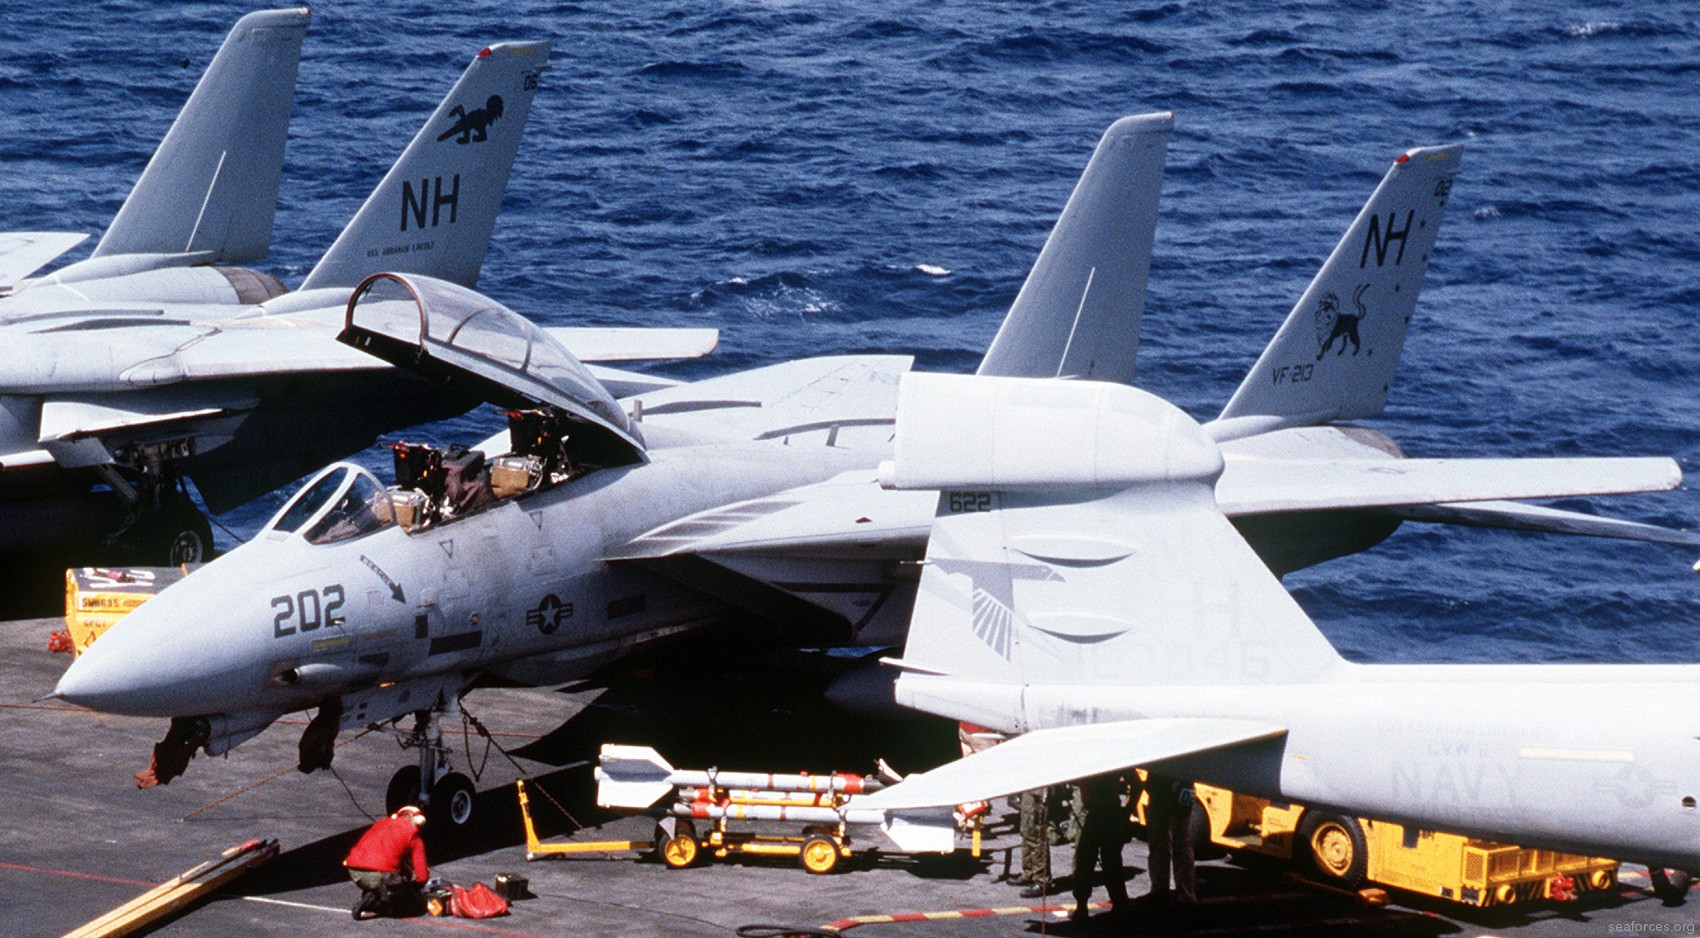 vf-213 black lions fighter squadron us navy f-14a tomcat carrier air wing cvw-11 uss abraham lincoln cvn-72 78